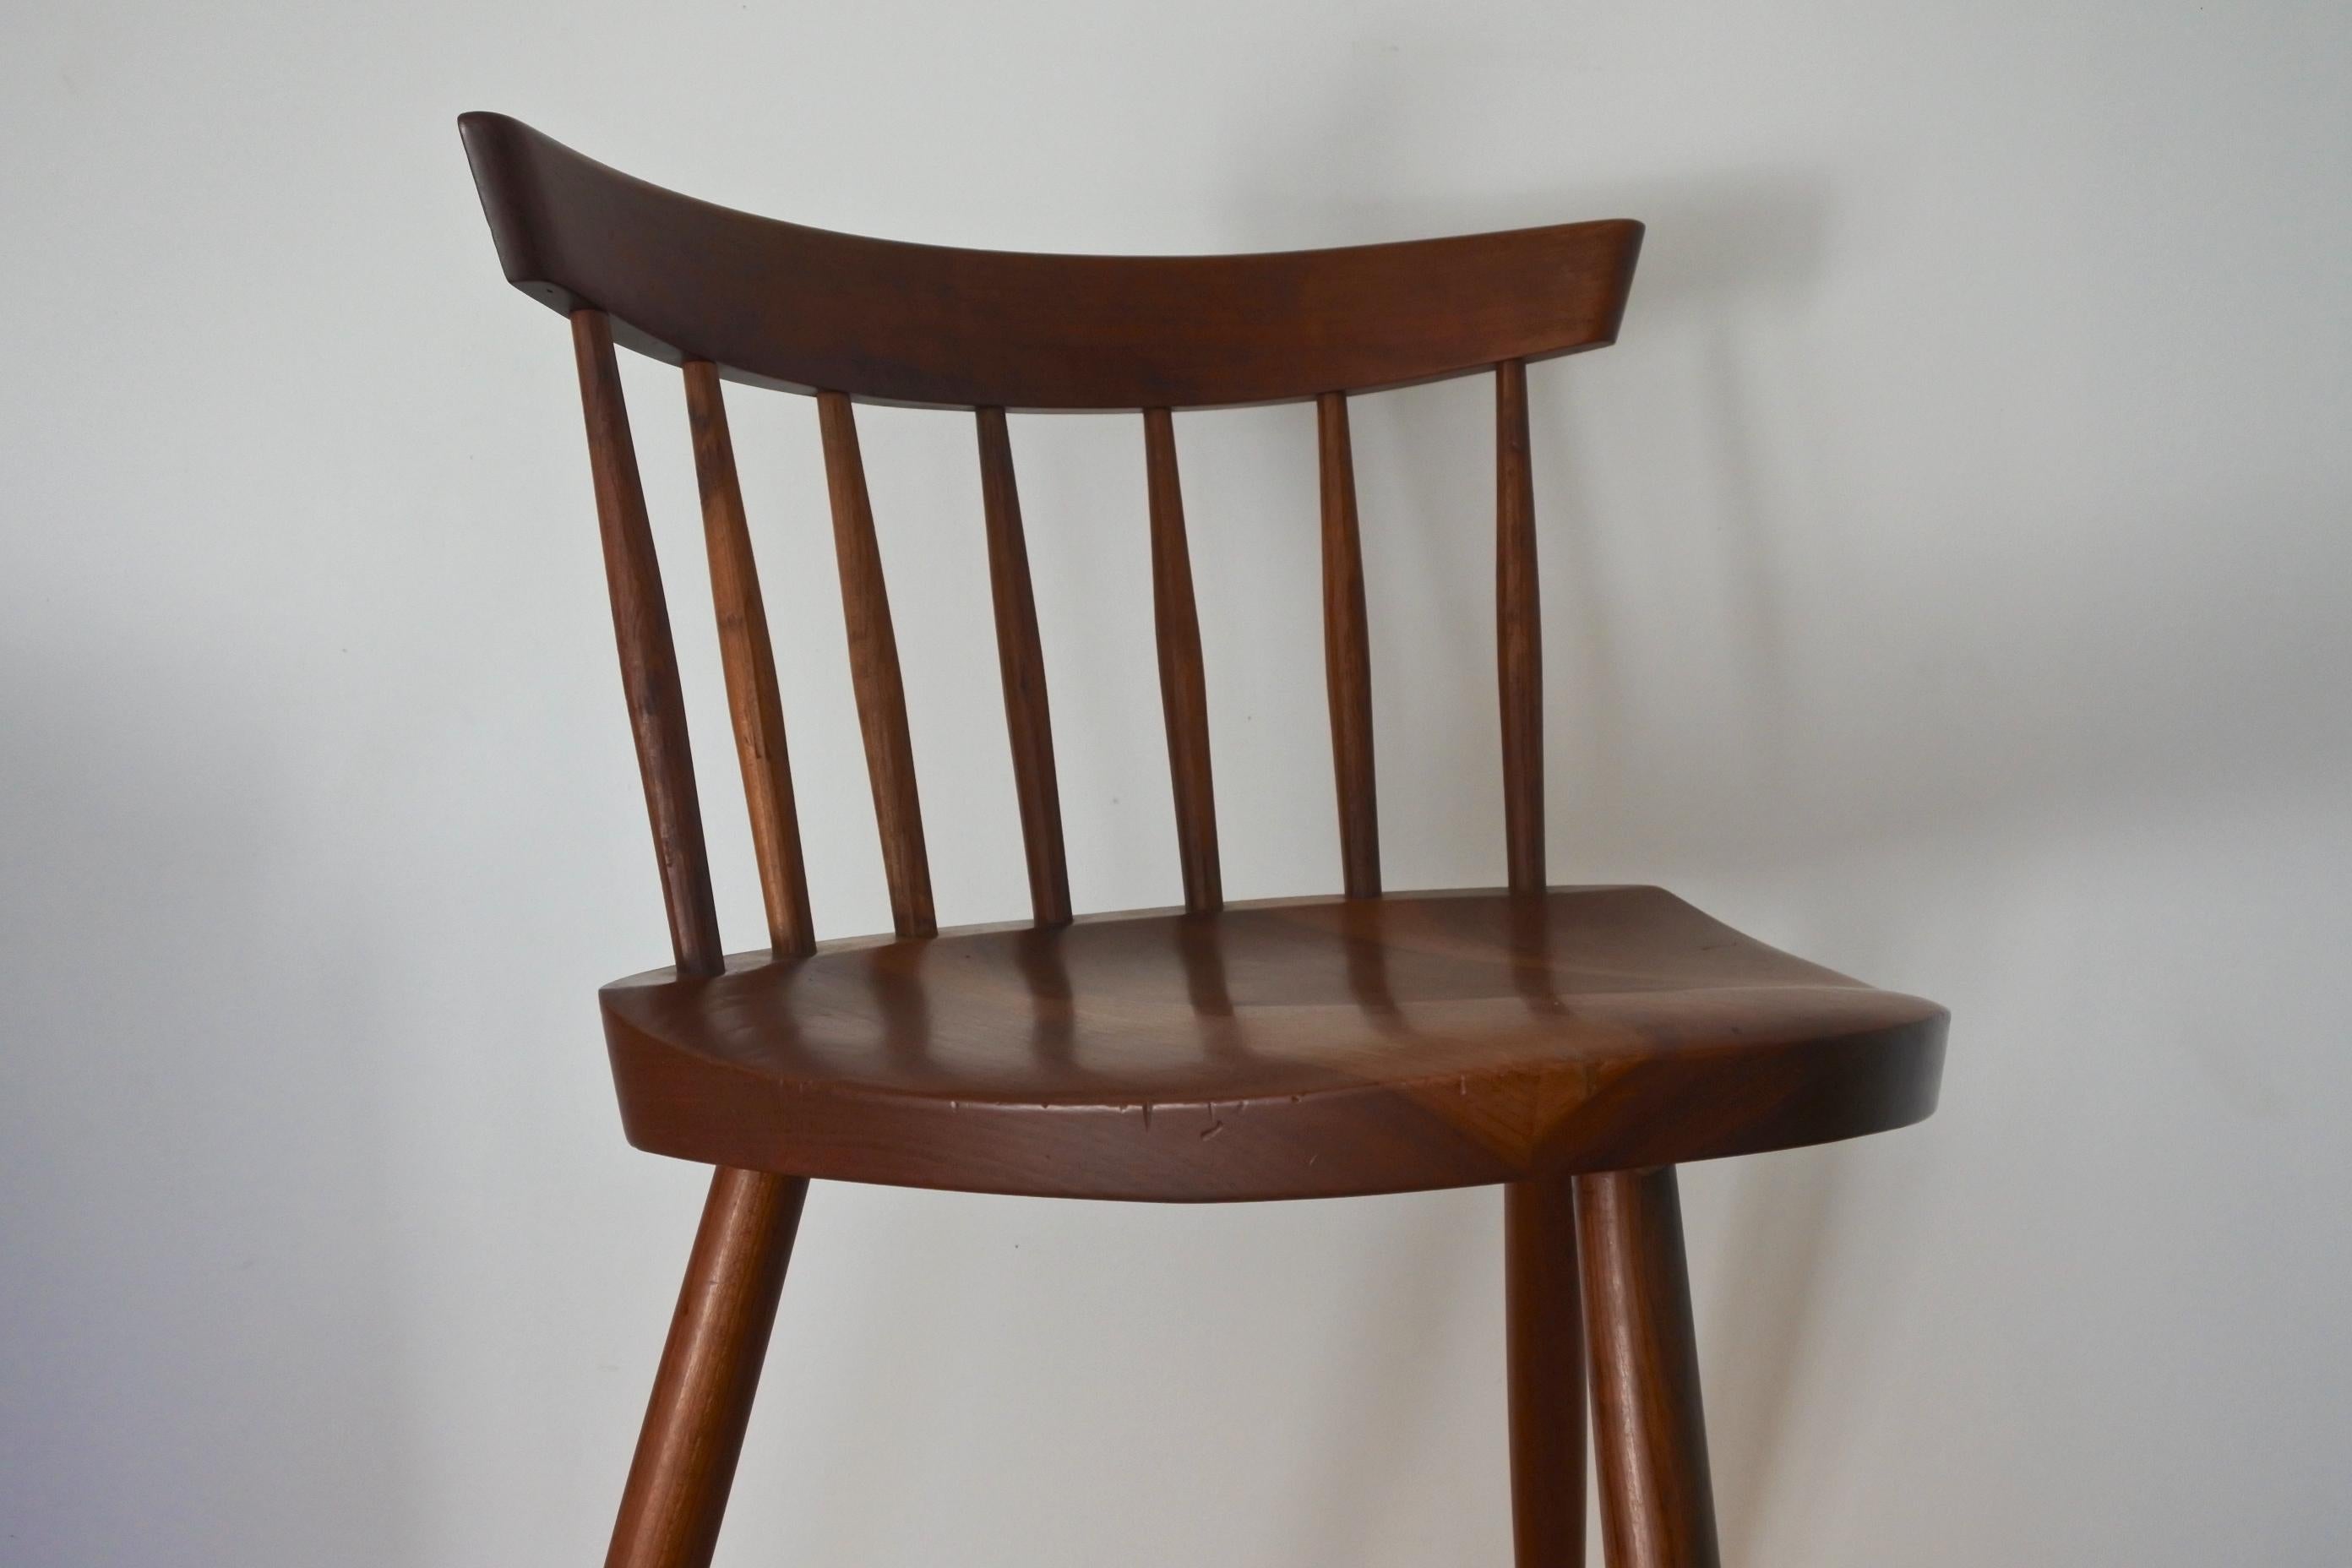 Early vintage version of the Mira chair by George Nakashima in cherrywood.